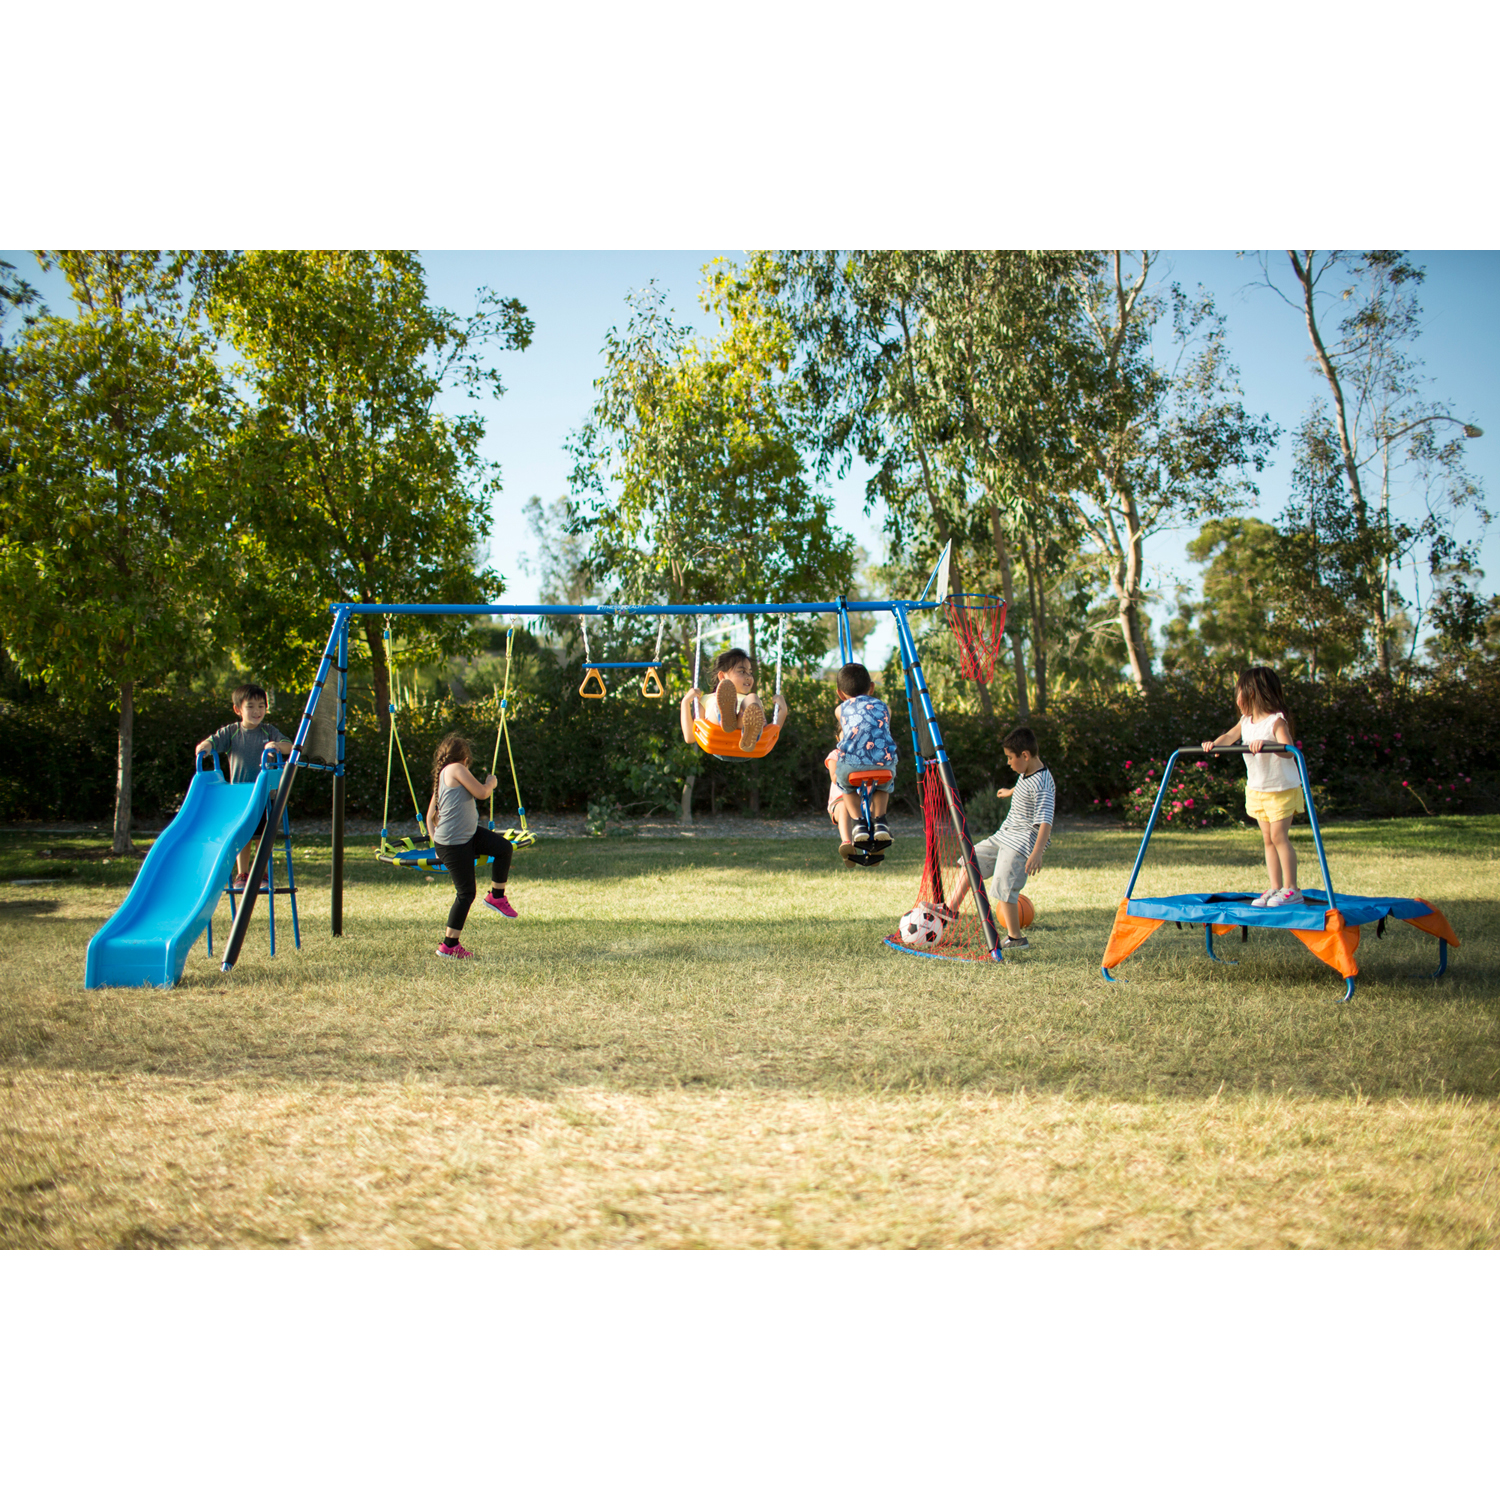 Fitness Reality Kids 'The Ultimate' 8 Station Sports Series Metal Swing Set with Basketball and Soccer - image 16 of 16